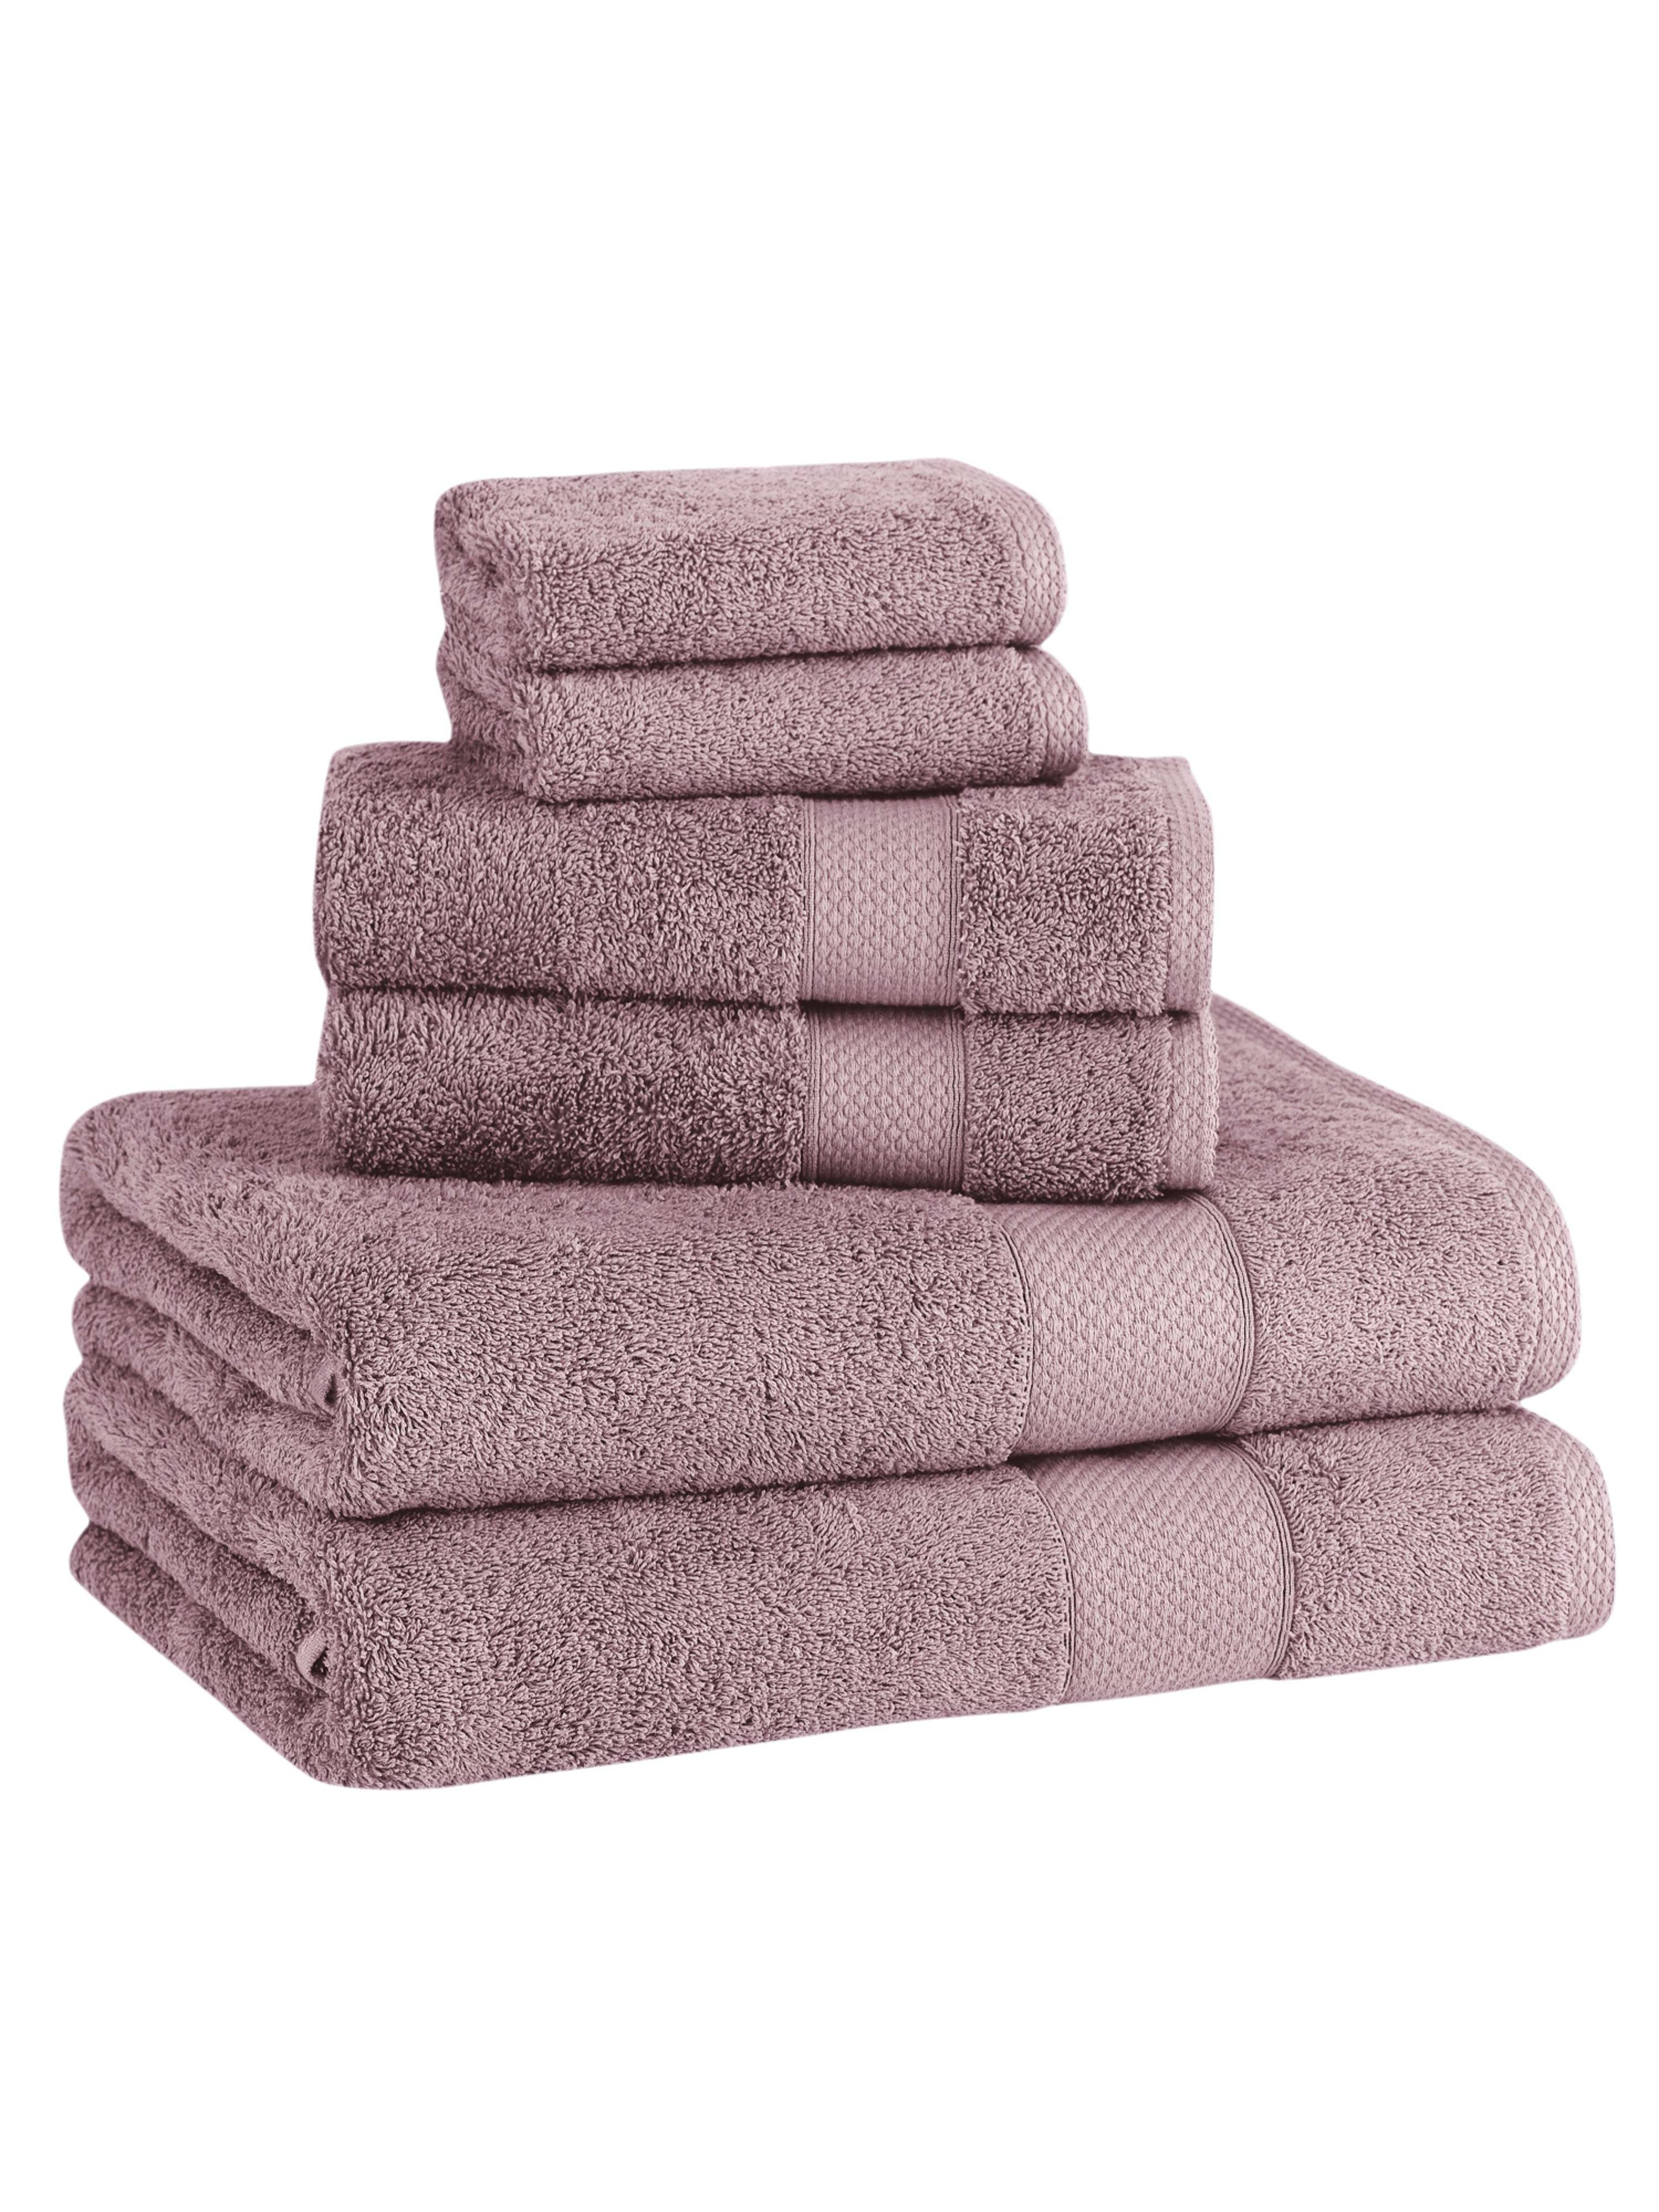 CLASSIC TURKISH TOWELS CLASSIC TURKISH TOWELS LUXURY MADISON TURKISH TOWELS SET OF 6-PIECE PLUSH AND THICK